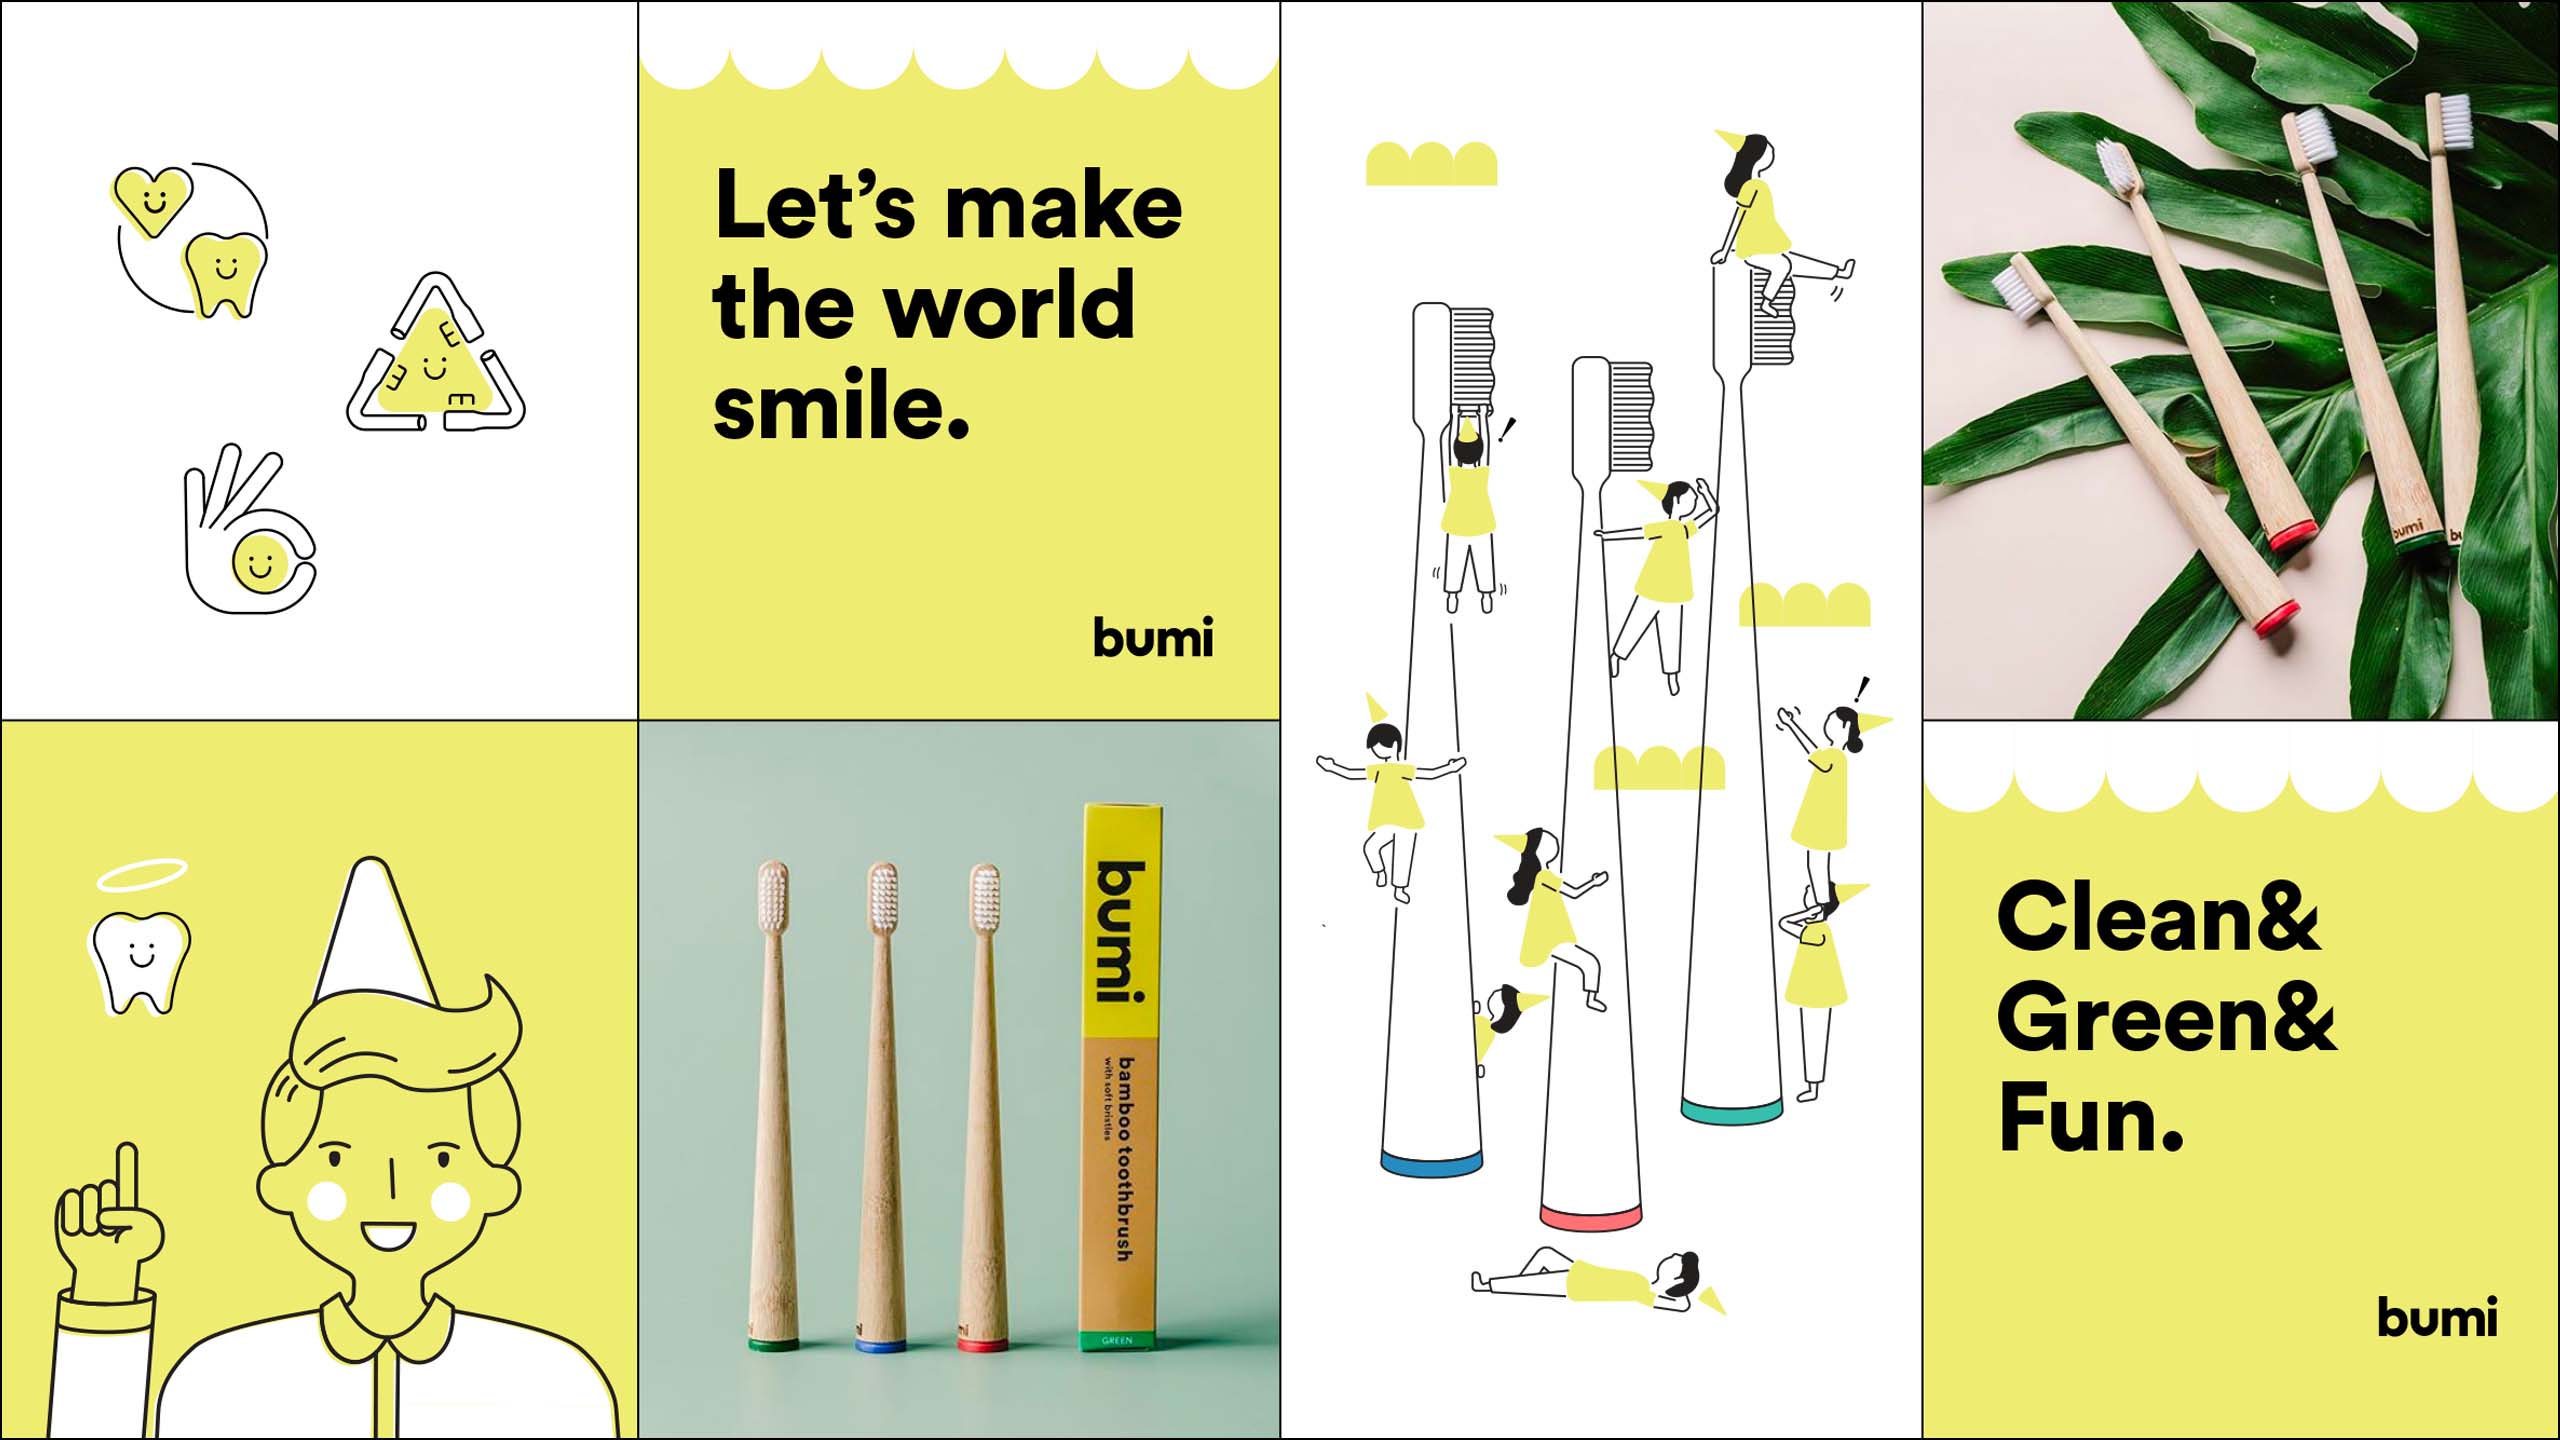 Fun minimalist branding and illustrations for sustainable toothbrush brand Bumi